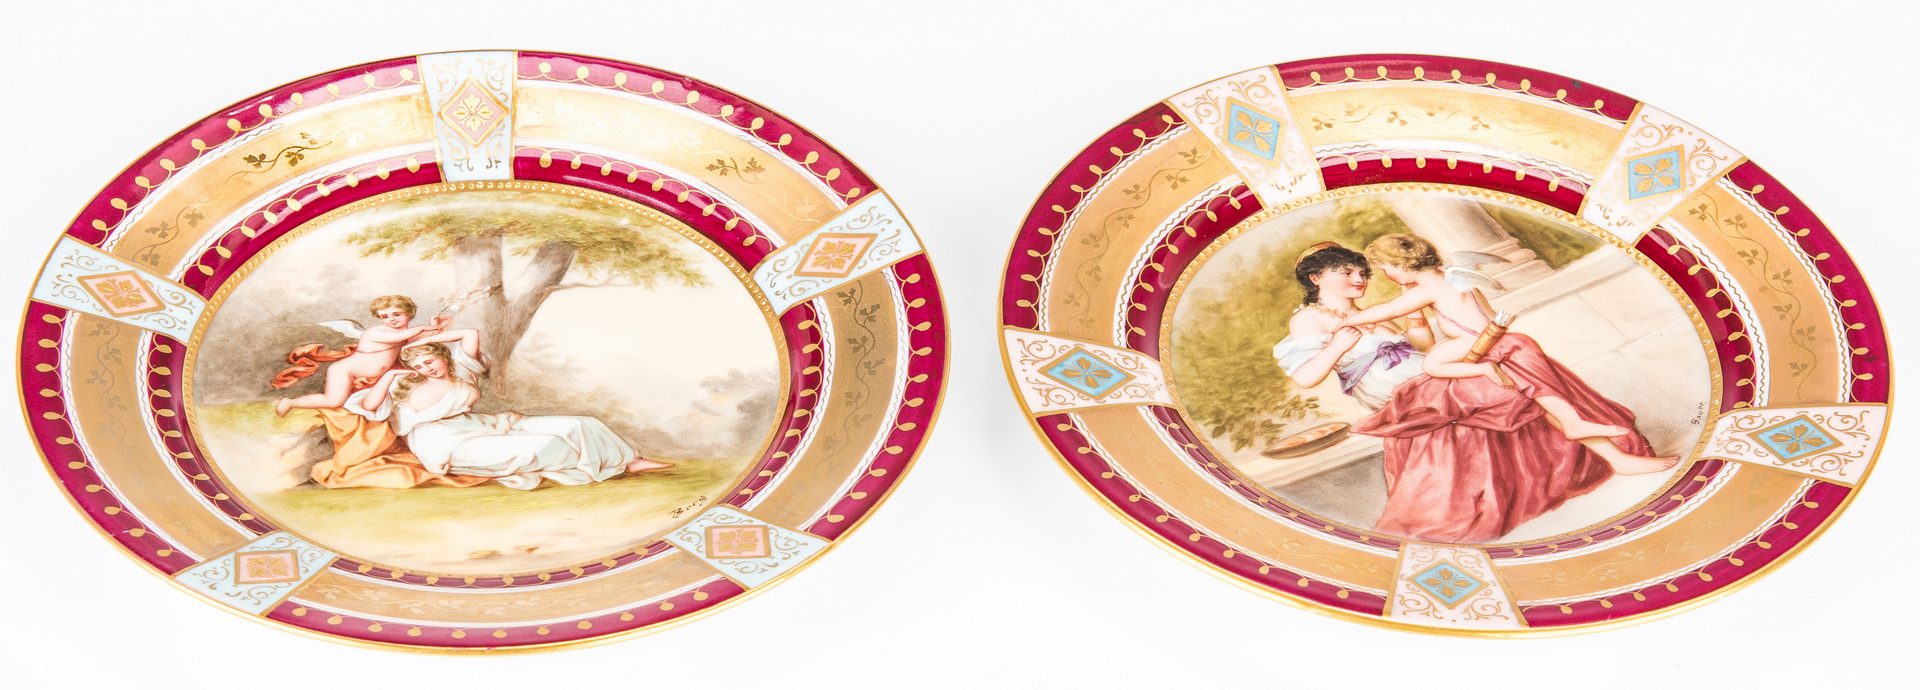 Lot 226: Pr. Royal Vienna Cabinet Plates, Berg and Bauer